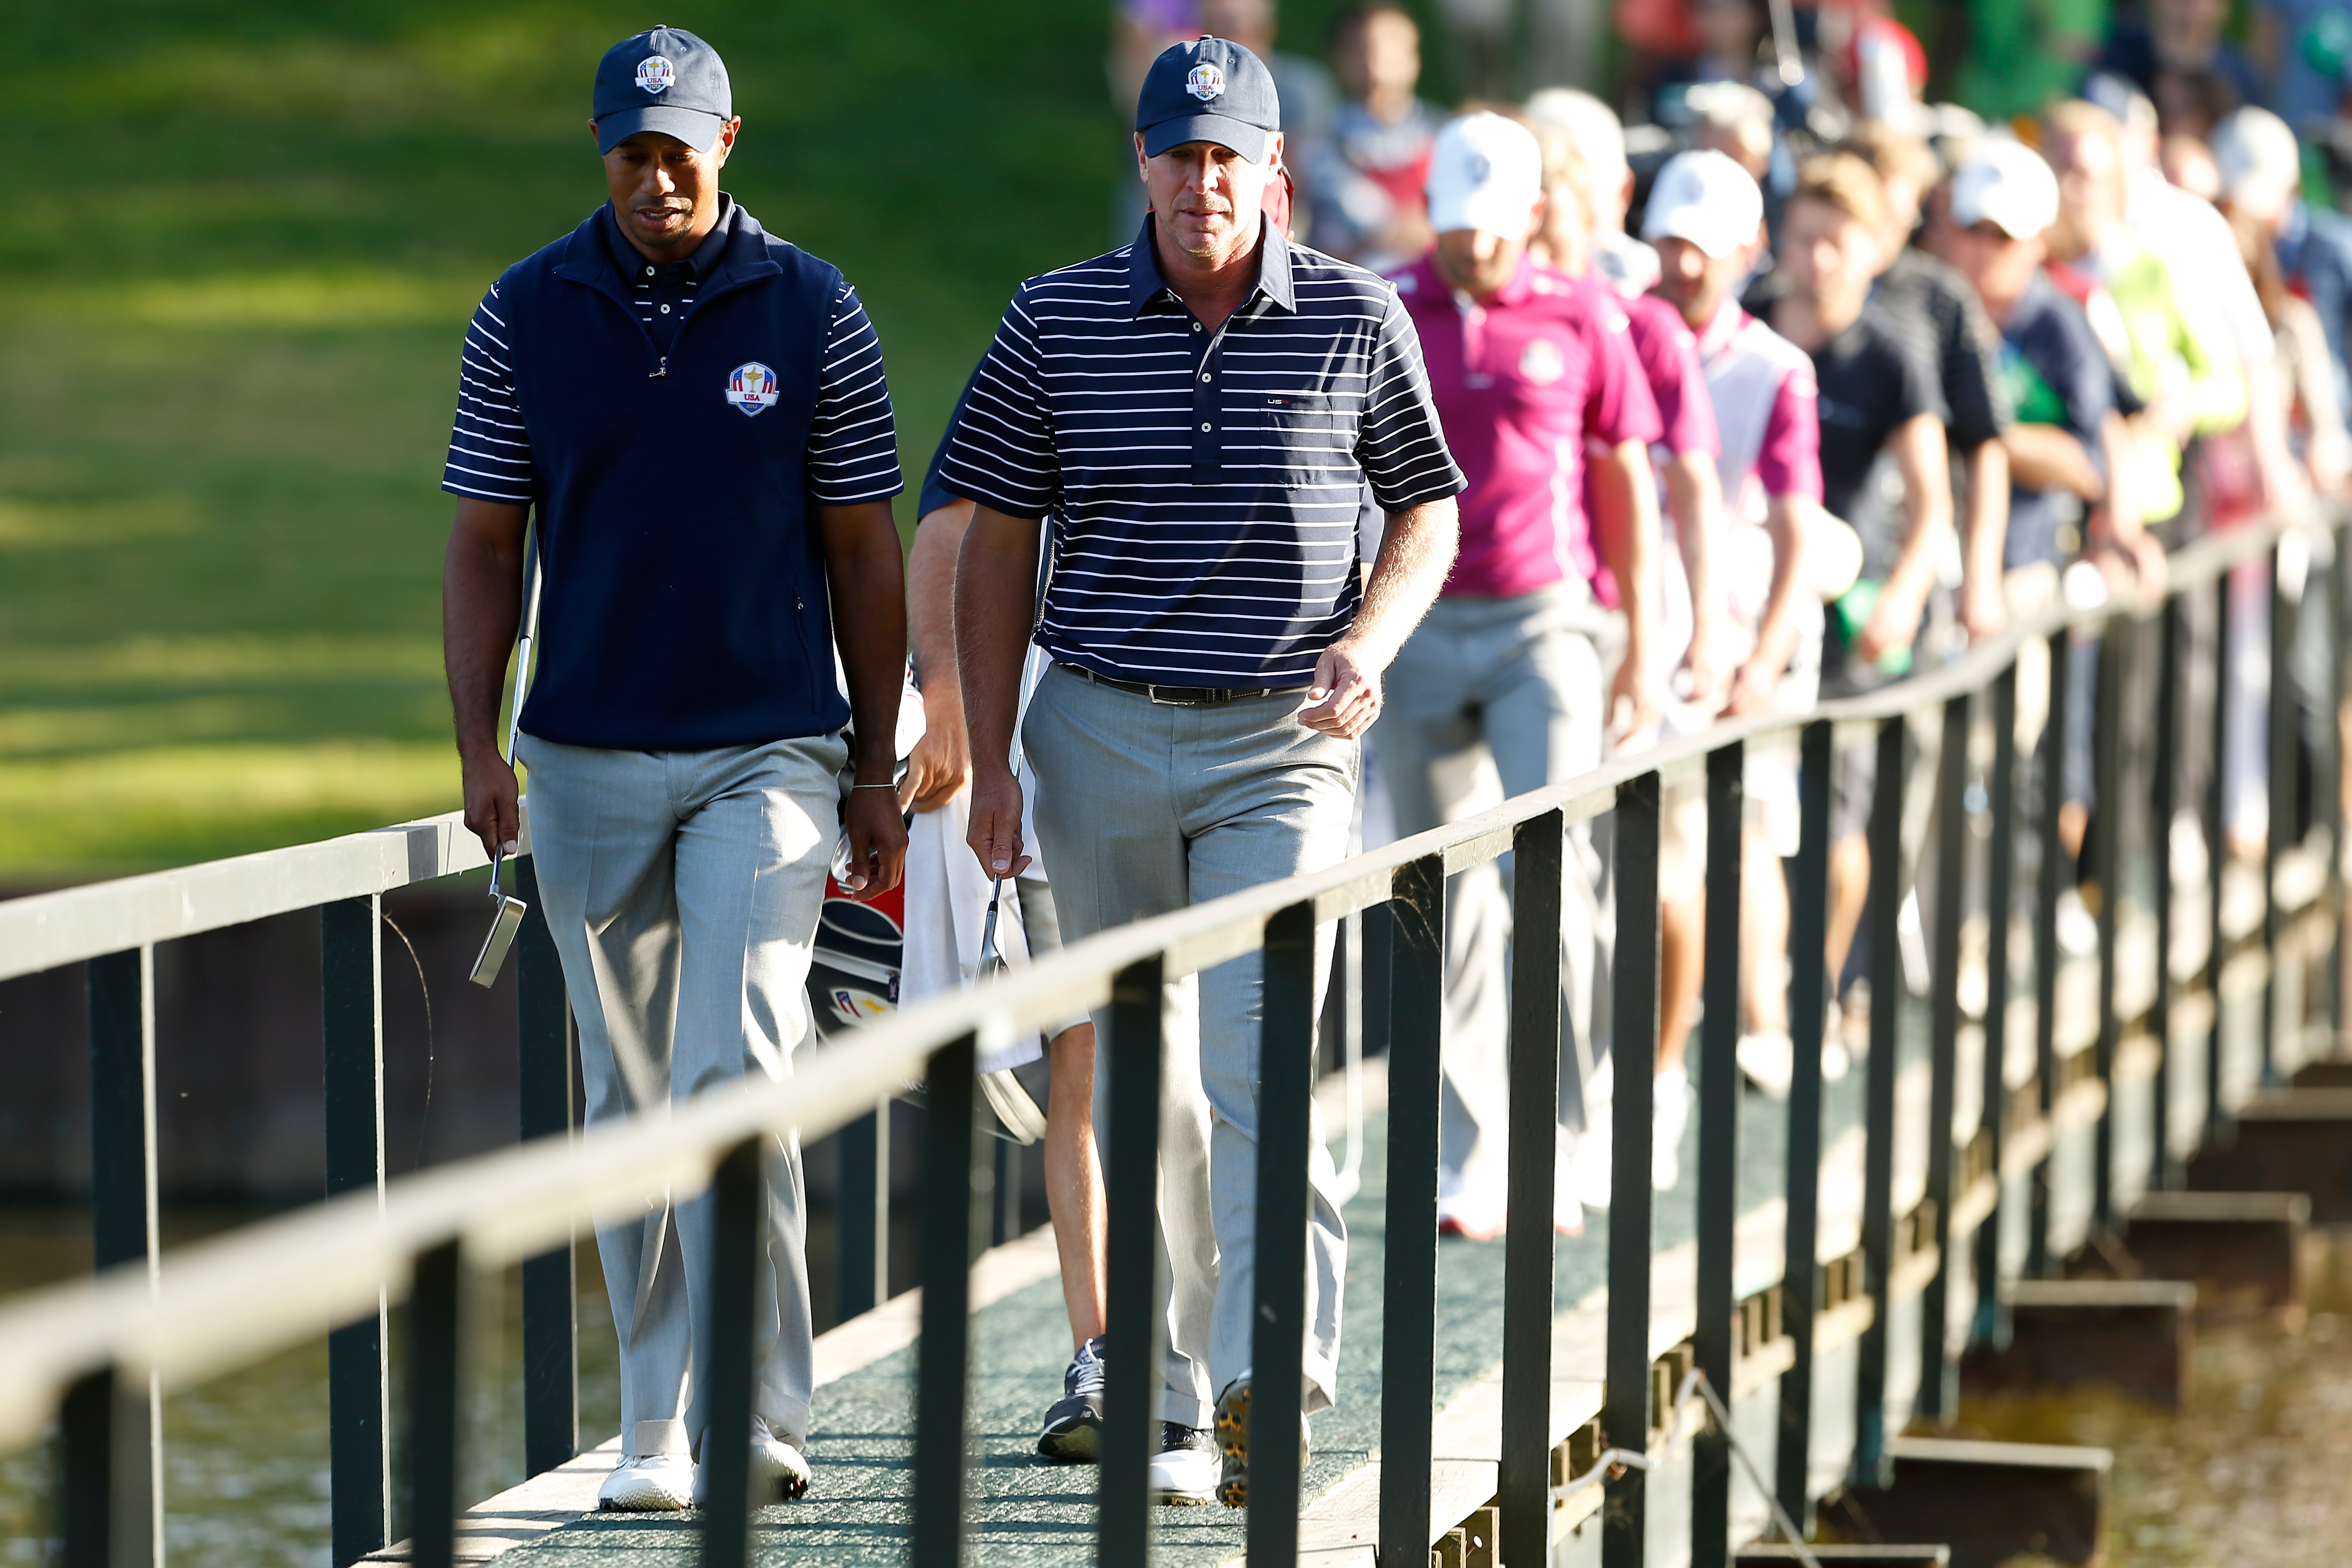 Tiger's Ryder Cup press conference Saturday Newsfeed